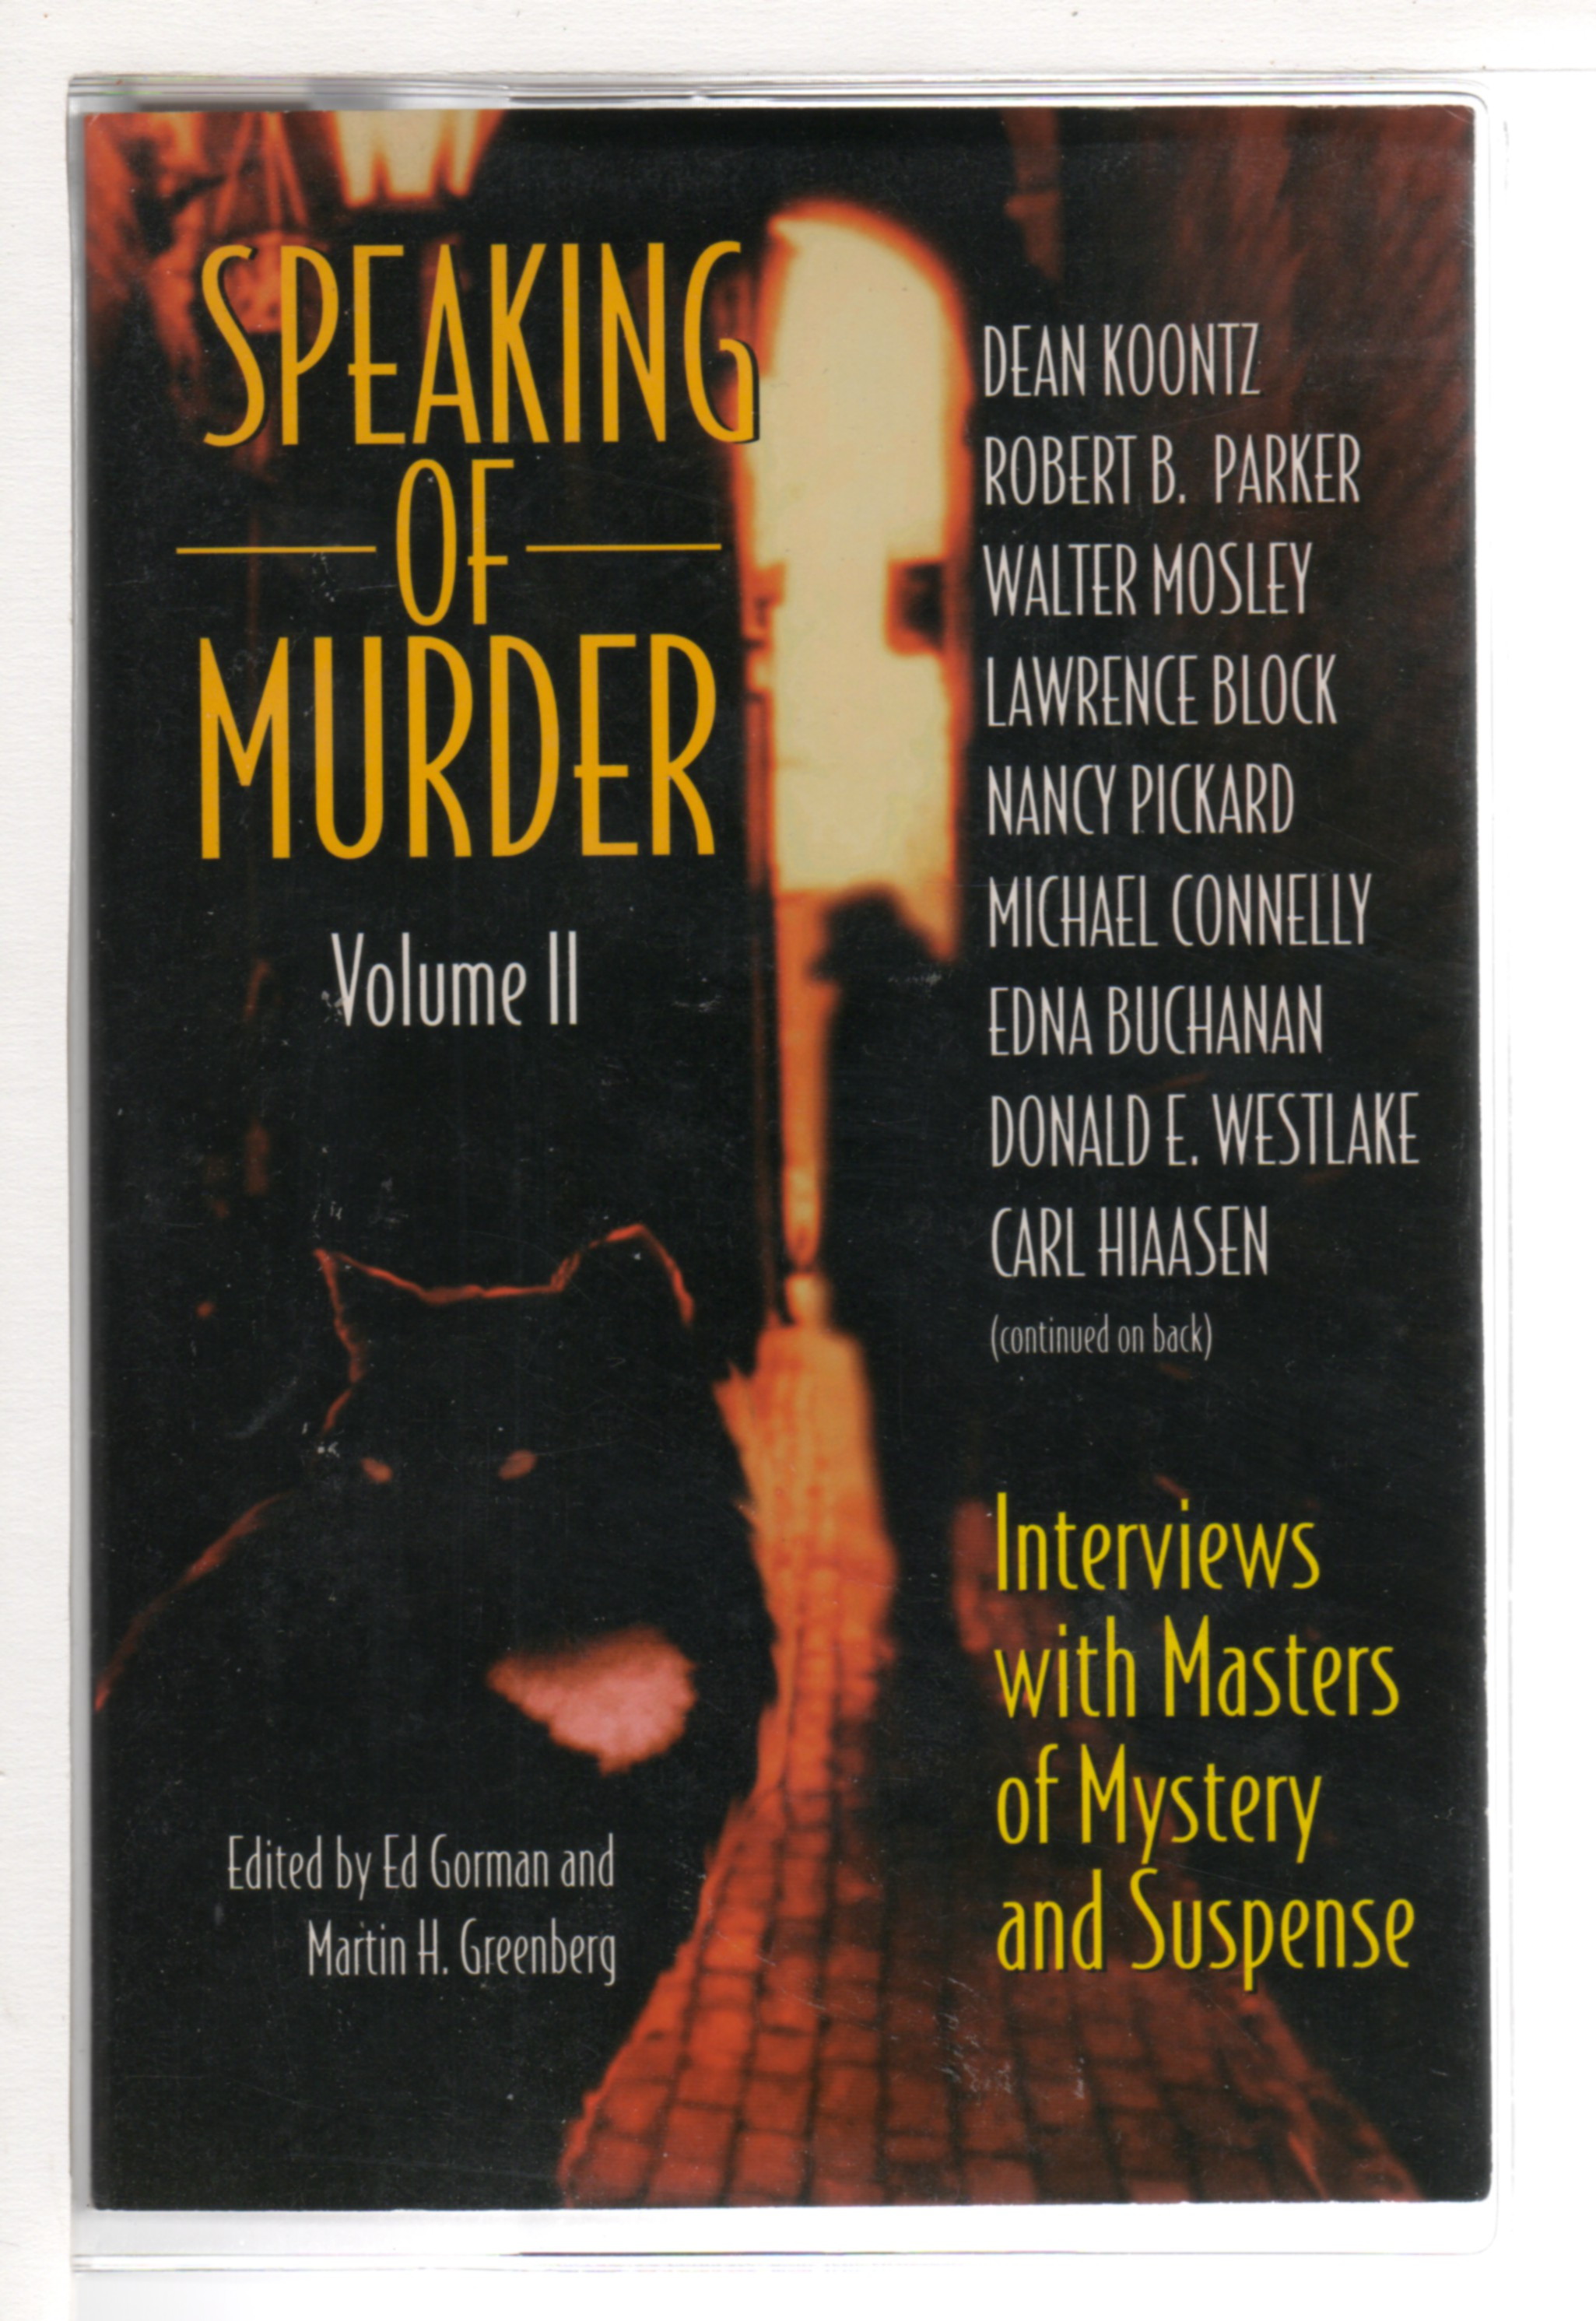 SPEAKING OF MURDER, Volume II - Gorman, Ed and Martin H. Greenberg, editors. J.A. Jance, Laurie King, Walter Mosley and Lawrence Block, signed.